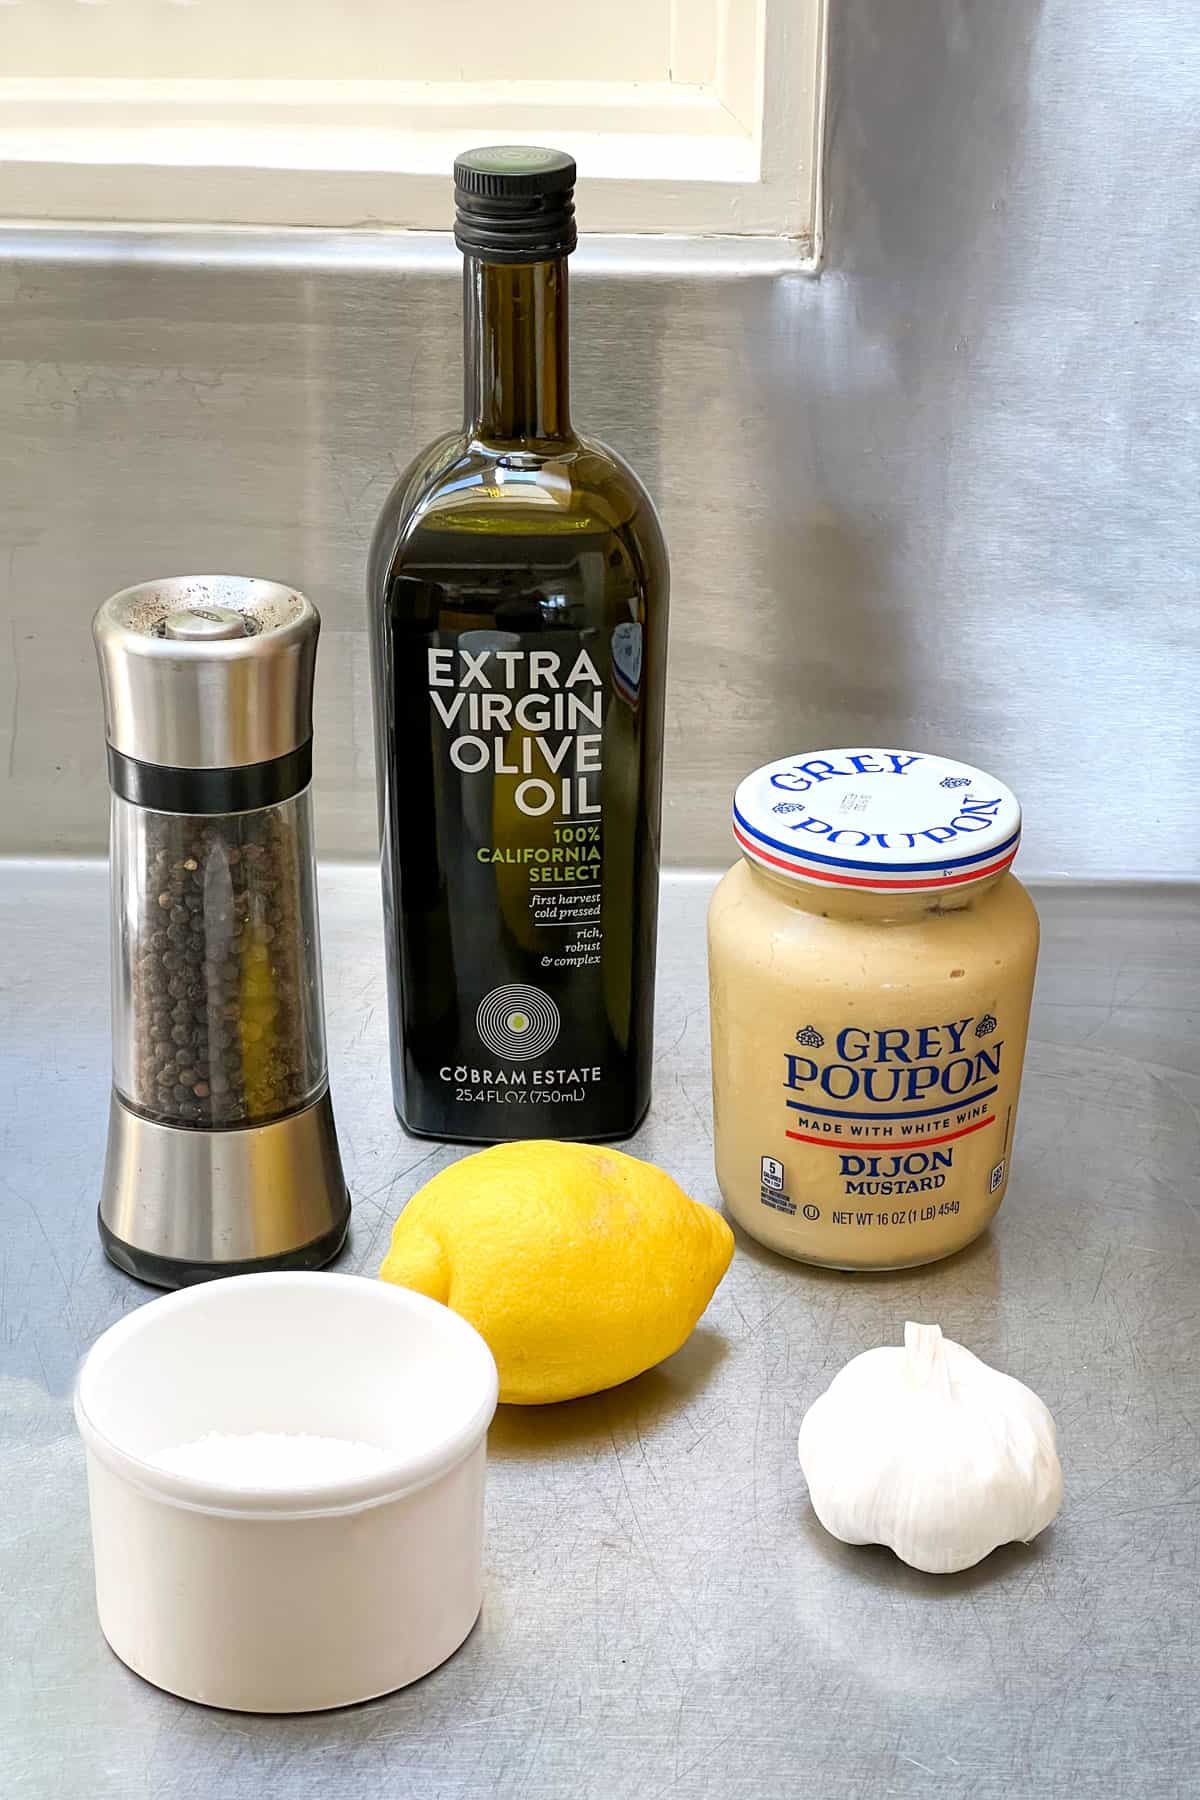 bottle of extra virgin olive oil, pepper grinder, jar of dijon mustard, a lemon, a white round salt cellar, and a bulb of garlic, all on a stainless steel countertop